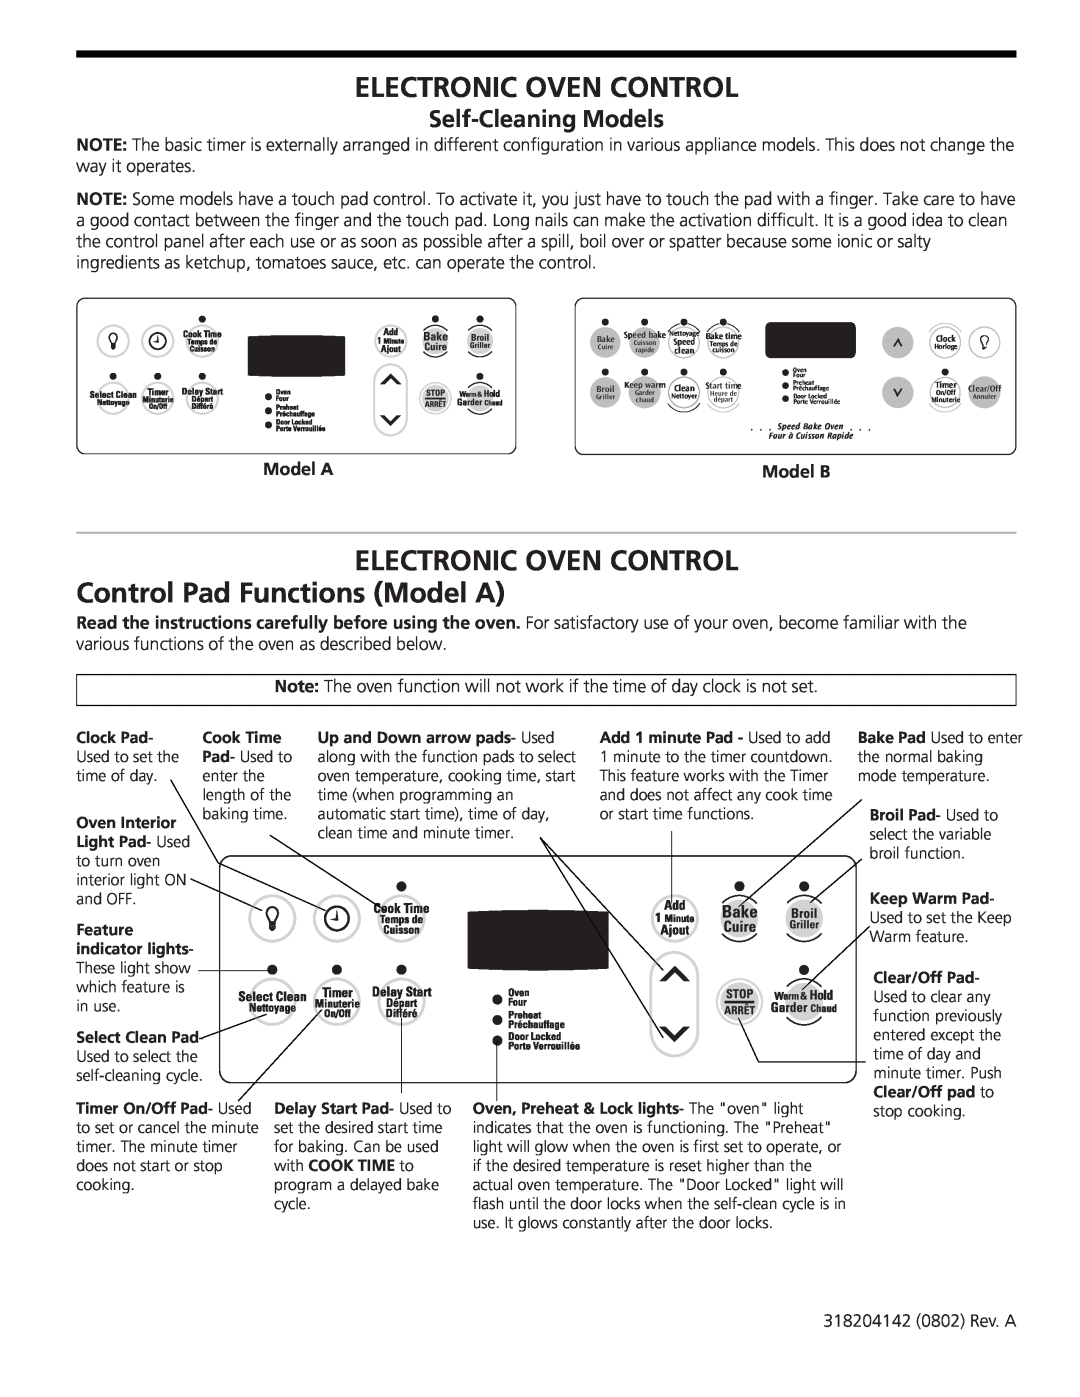 Frigidaire CGEB27Z7HB manual Electronic Oven Control, Control Pad Functions Model A, Self-CleaningModels, Model B 